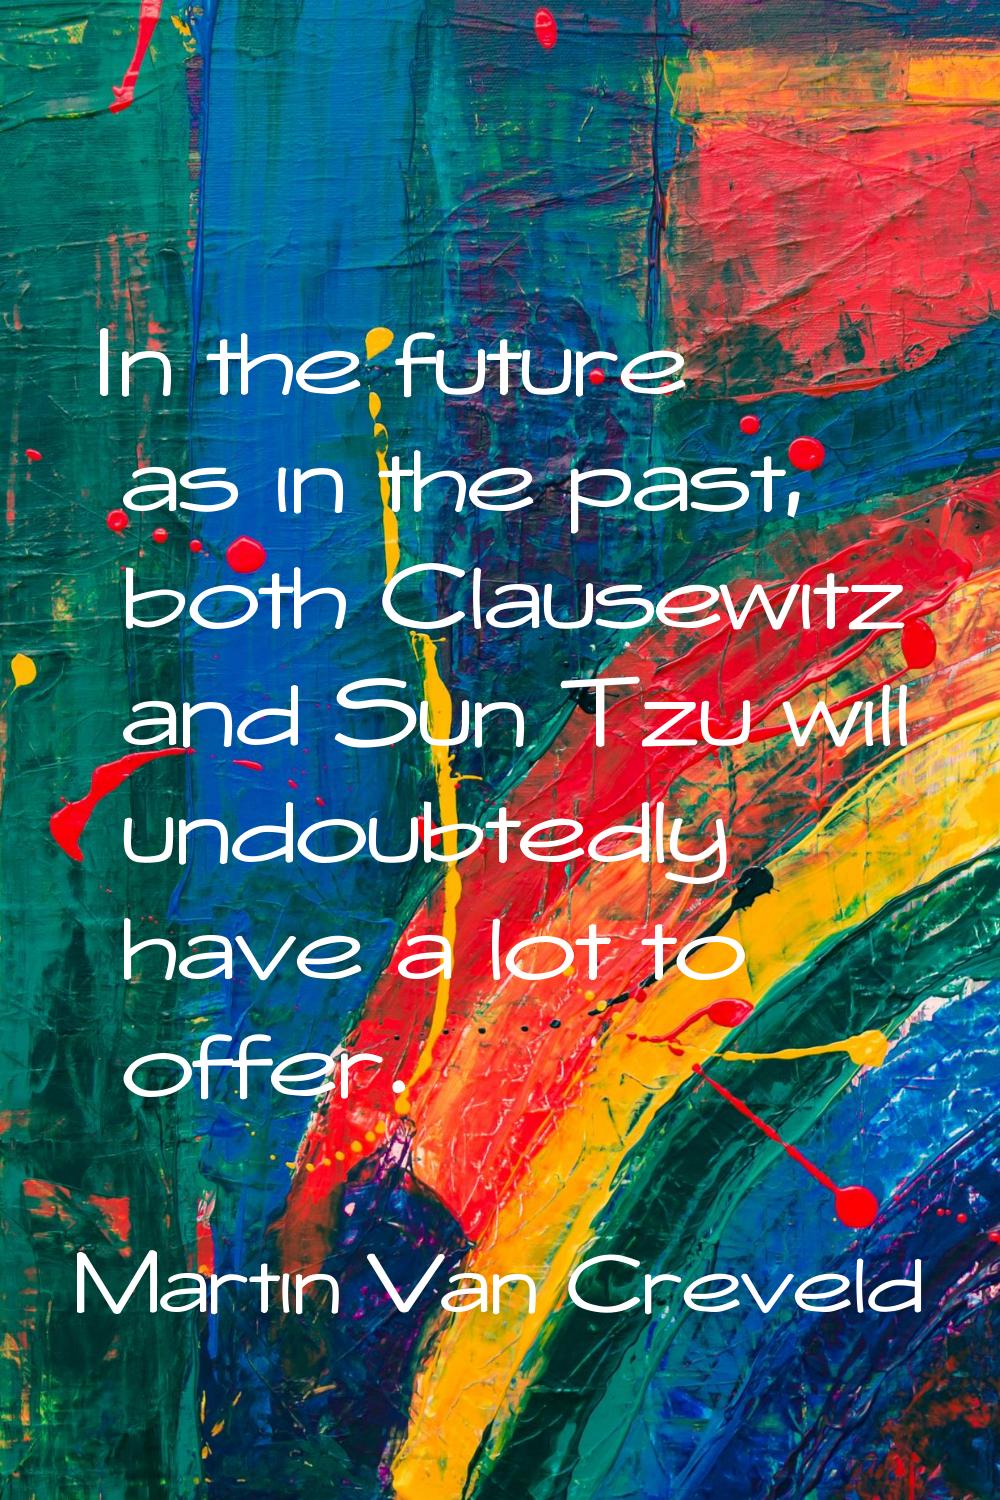 In the future as in the past, both Clausewitz and Sun Tzu will undoubtedly have a lot to offer.